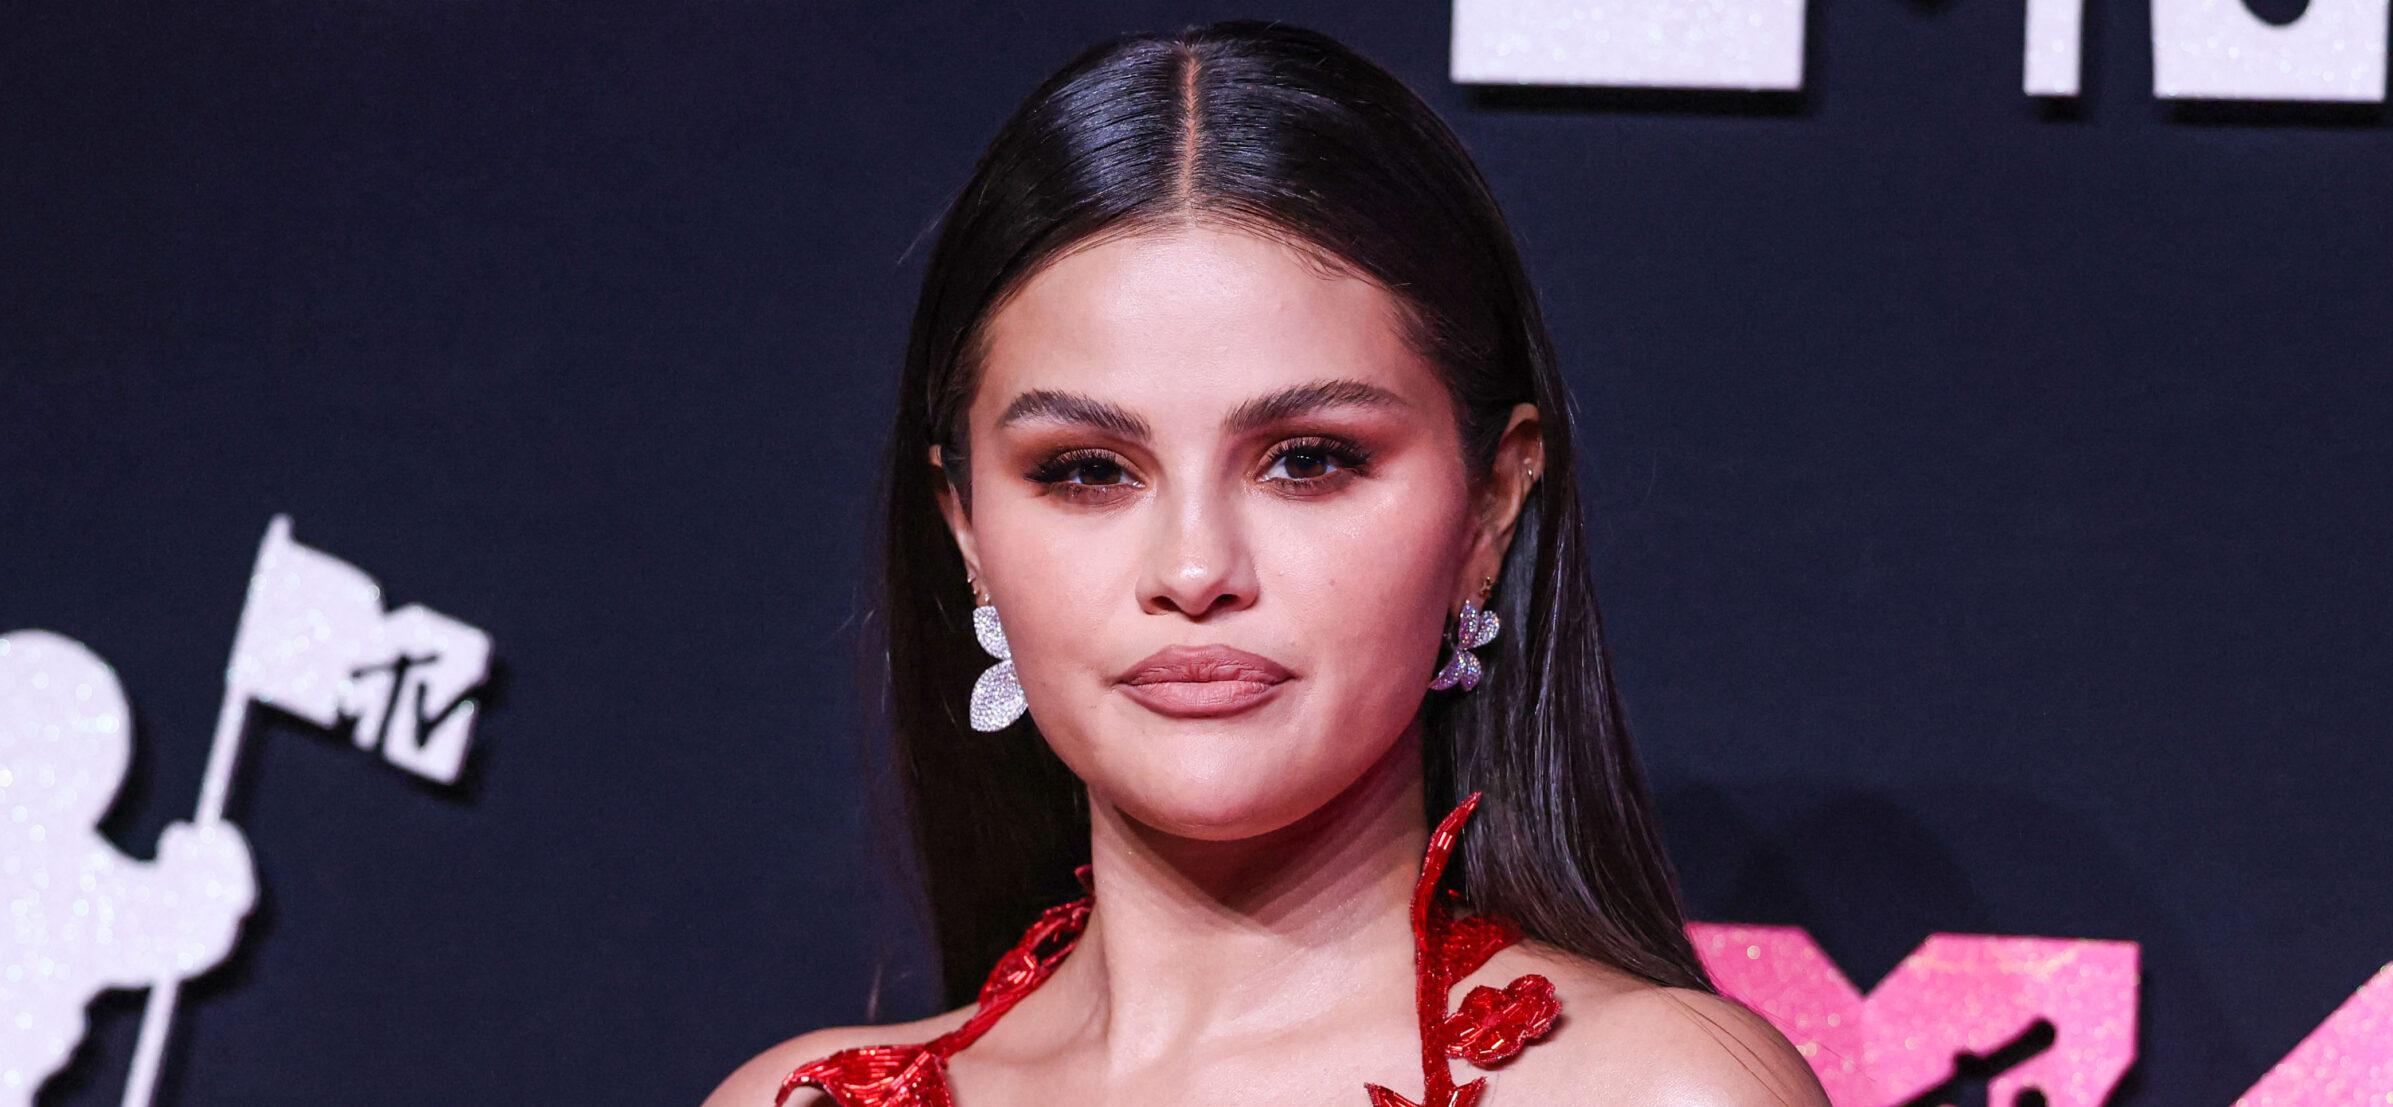 Selena Gomez Opens Up About Positive Factors For Her Mental Health Journey